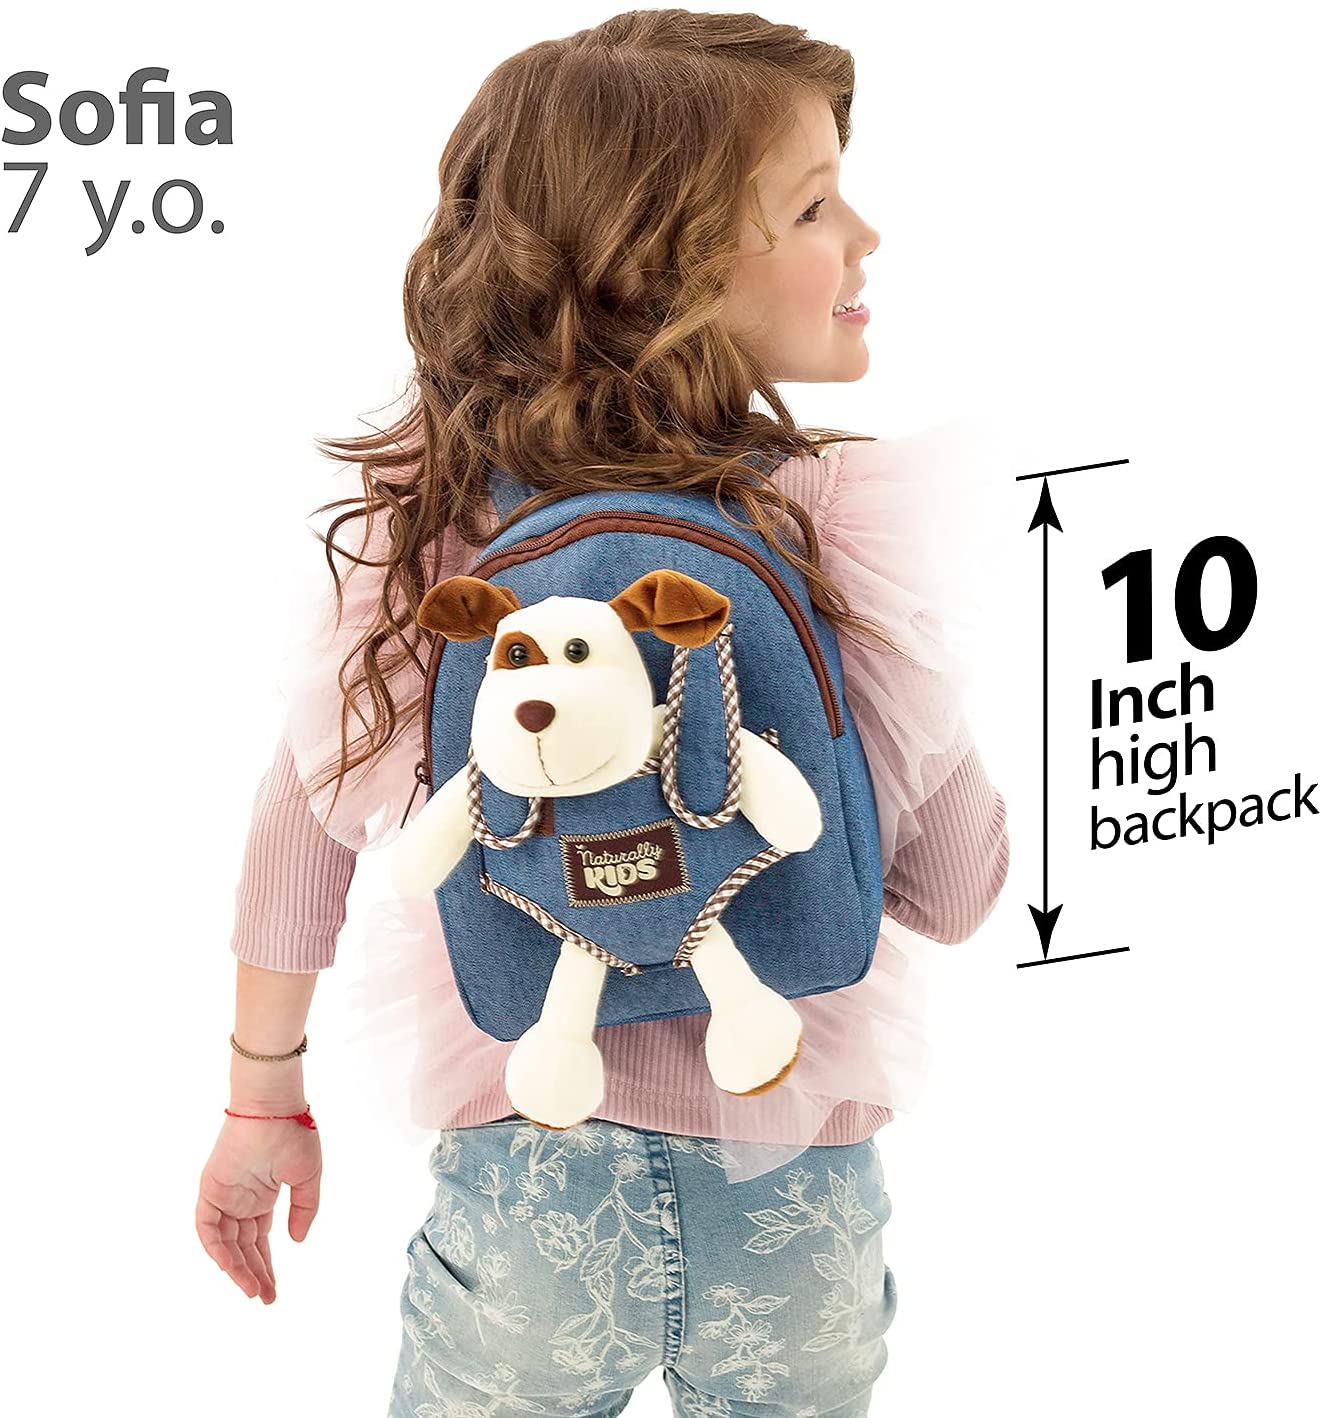 Naturally KIDS Small Backpack w Stuffed Animal Dog Plush Toy - Toddler Backpack for Boy Backpack for Kids - Toys for Kids Ages 3 4 5 6 7 Toys for 3 Year Old Boys Puppy Backpack - 4 Year Old Girl Gift - image 3 of 9